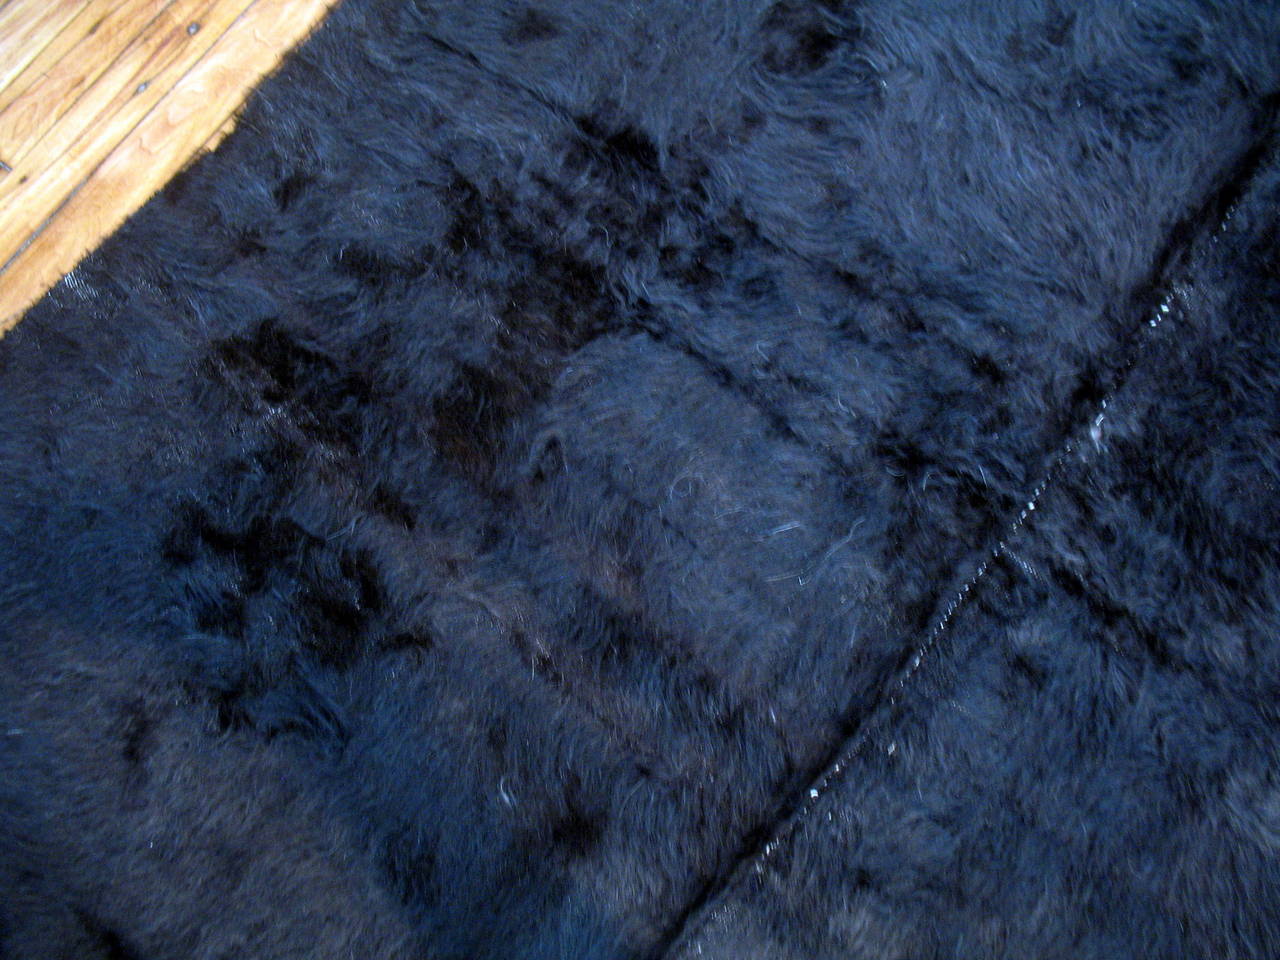 A solid black handwoven Turkish mohair rug that can be used as a floor covering or a blanket or even a wall hanging. All natural dyed woven in panels on a narrow loom.